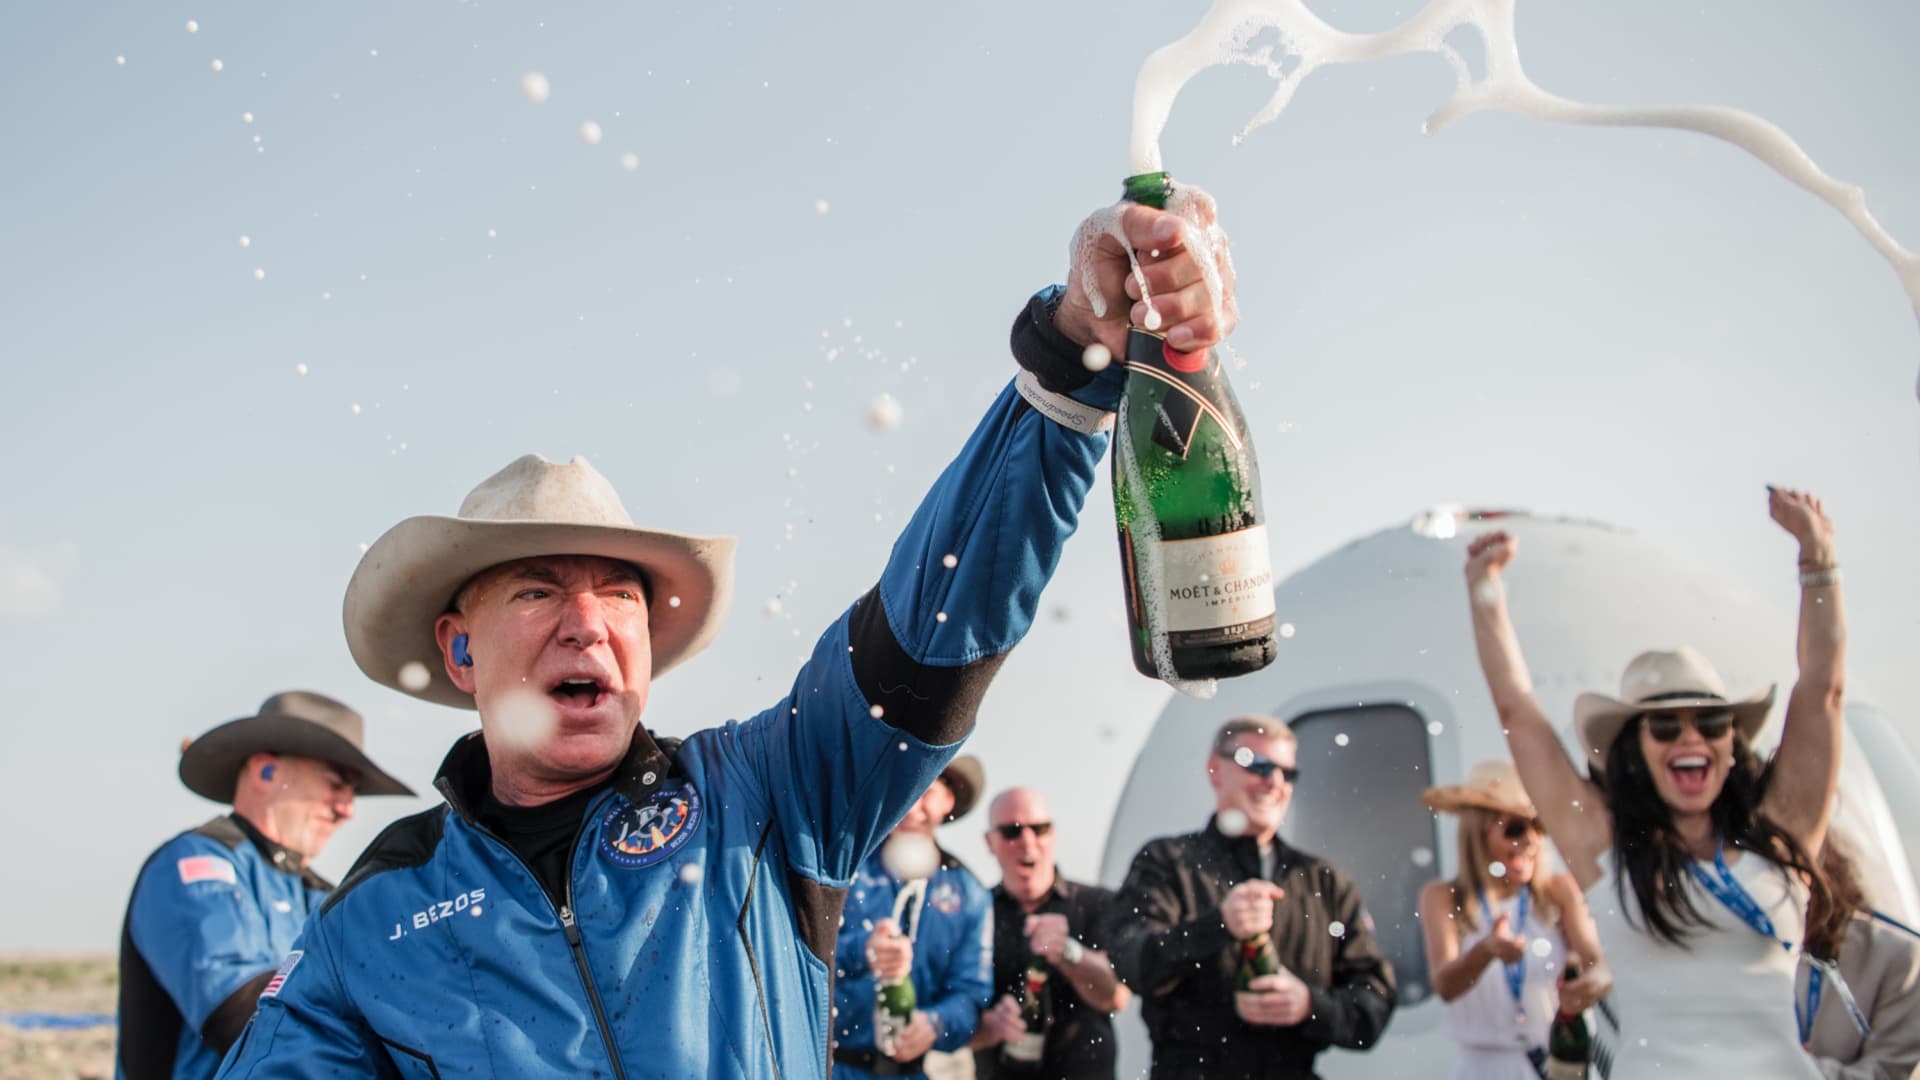 Jeff Bezos pops champagne after emerging from the New Shepard capsule after his spaceflight on July 20, 2021.